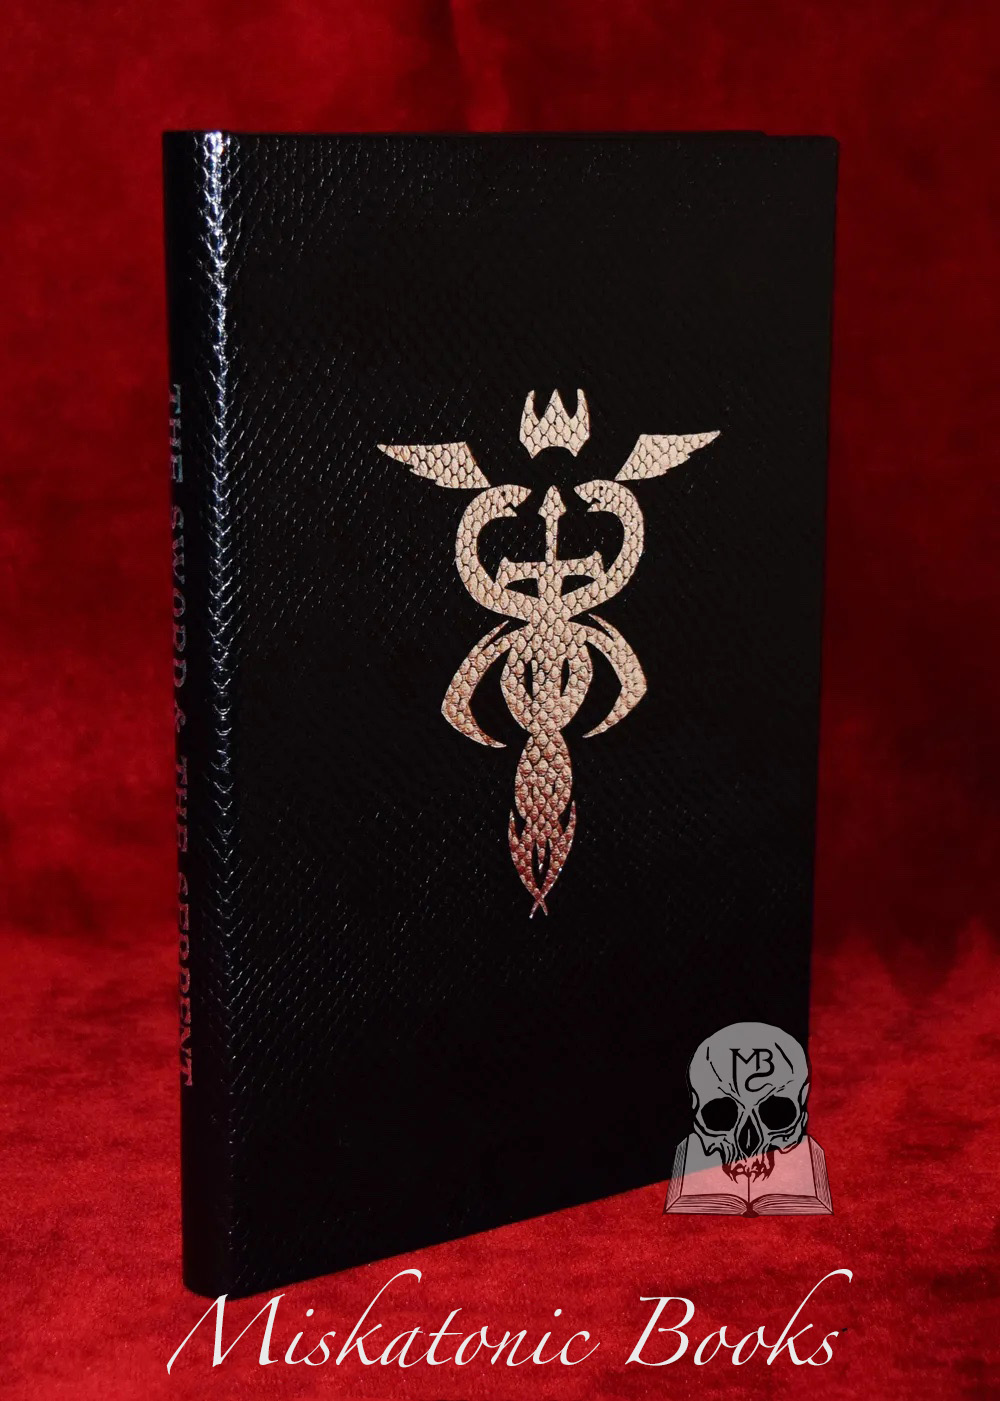 THE SWORD & THE SERPENT by David Mattichak - Deluxe Limited Edition Hardcover